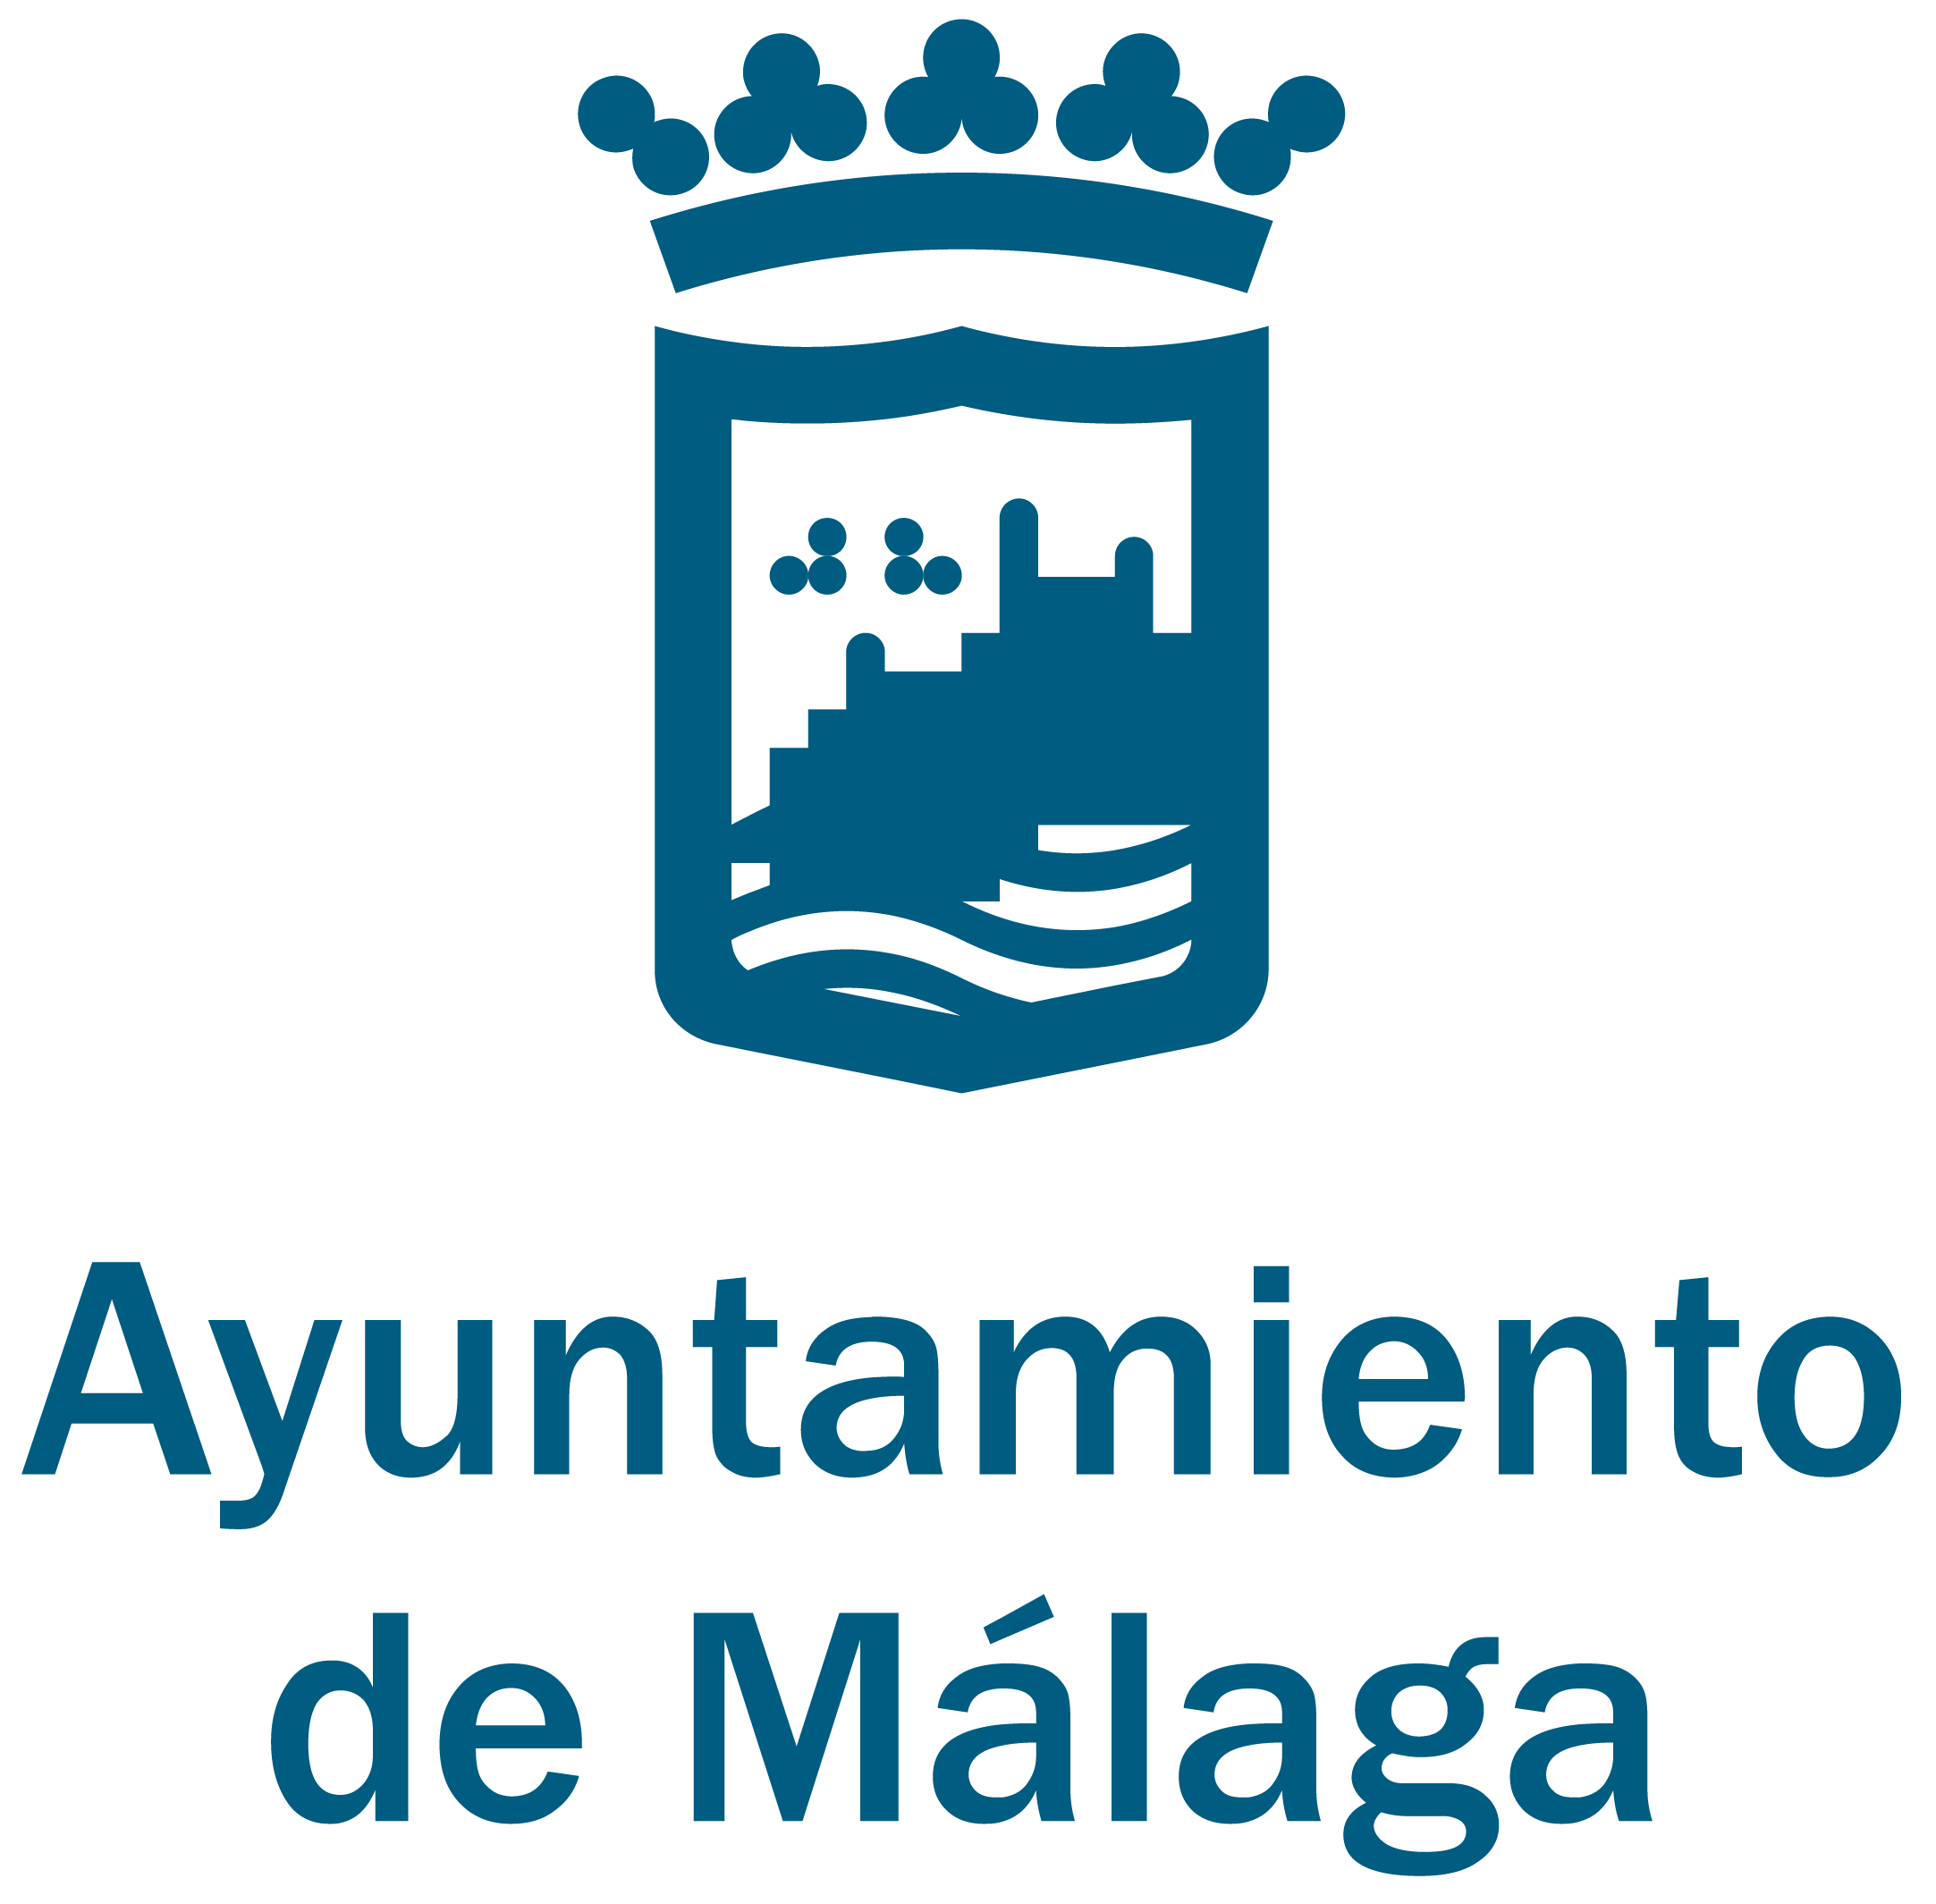 What to do in Málaga?